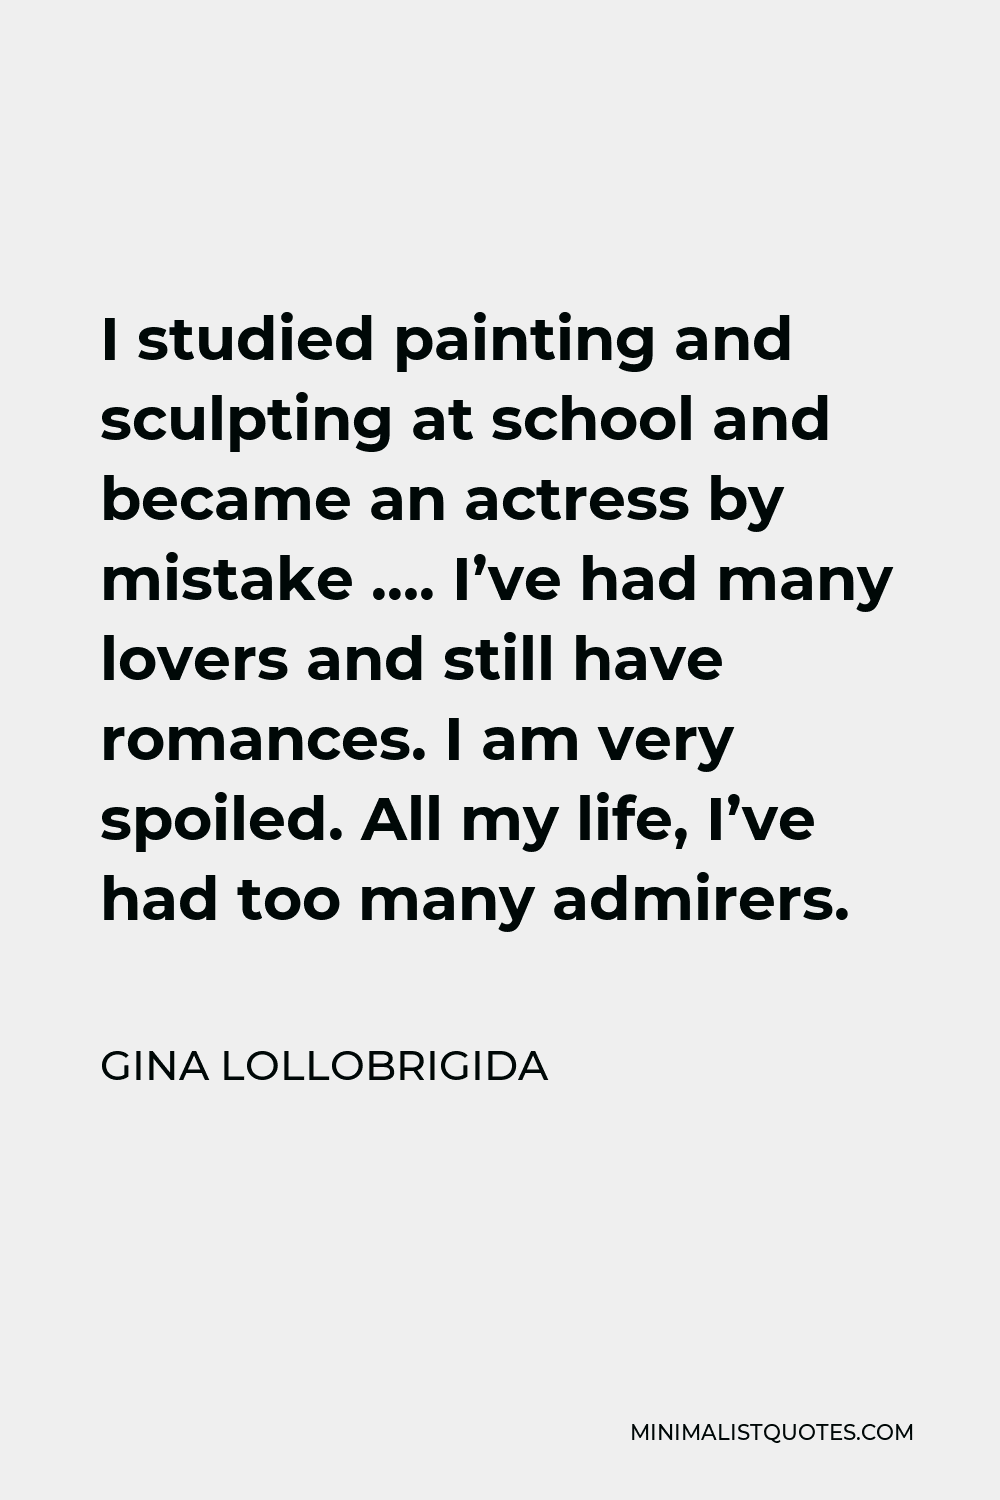 Gina Lollobrigida Quote - I studied painting and sculpting at school and became an actress by mistake …. I’ve had many lovers and still have romances. I am very spoiled. All my life, I’ve had too many admirers.